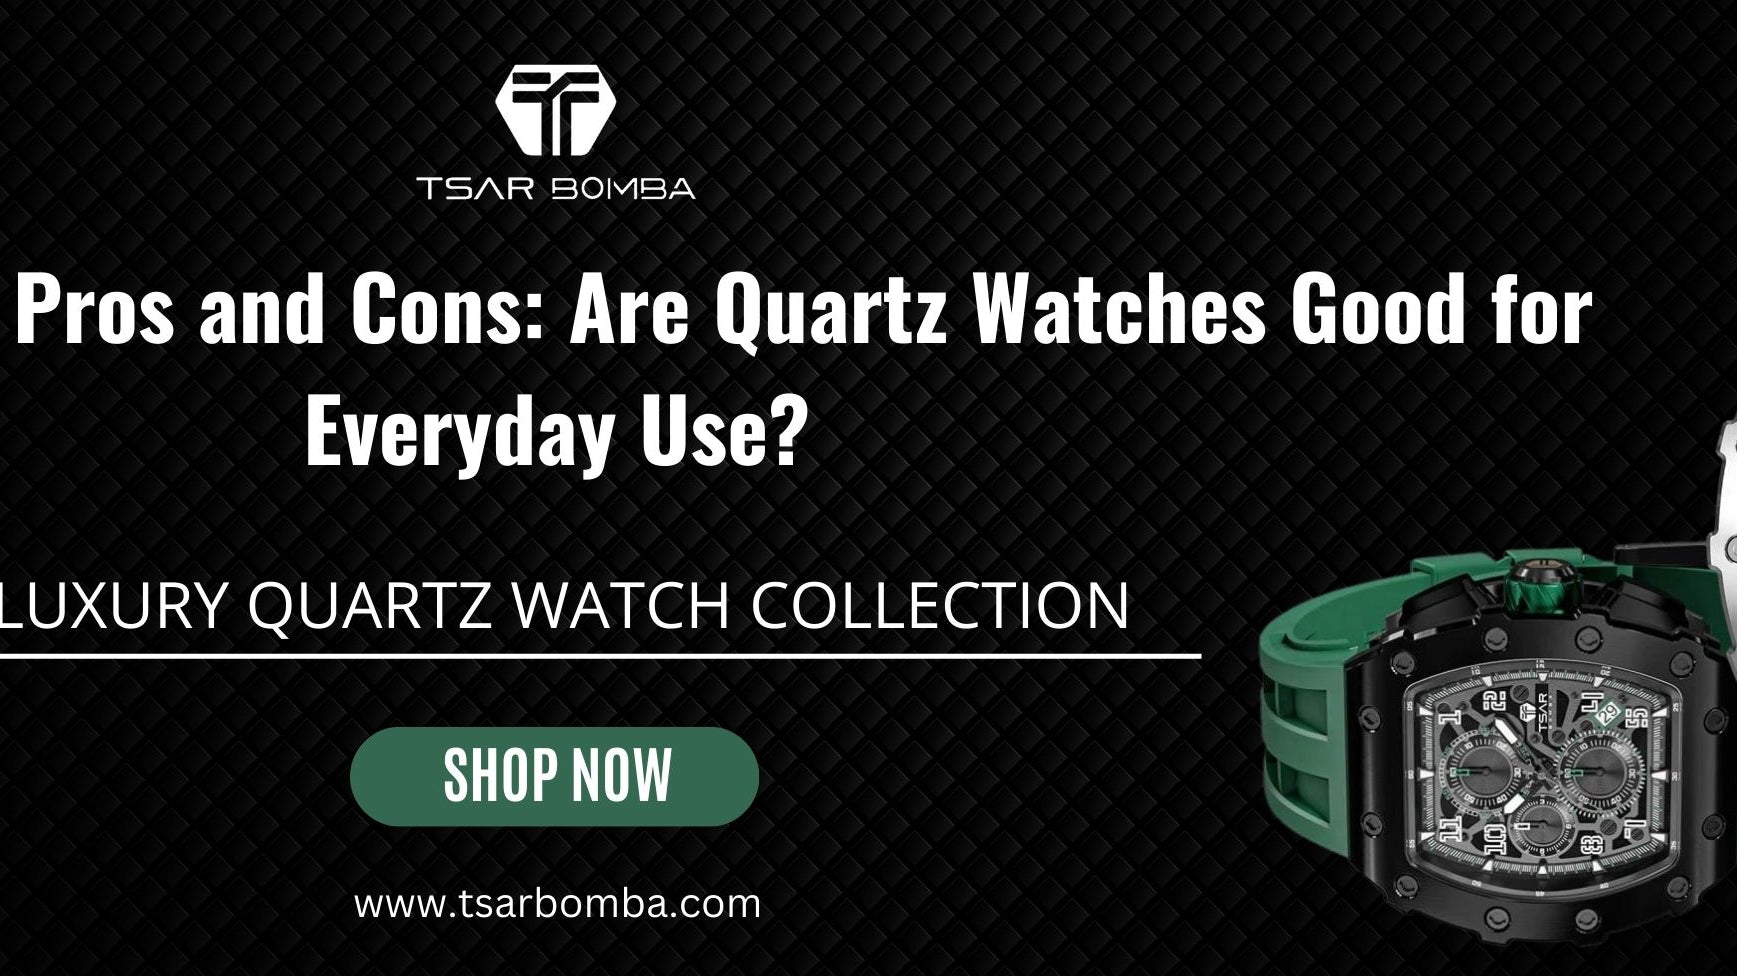 Exploring the Pros and Cons: Are Quartz Watches Good for Everyday Use?